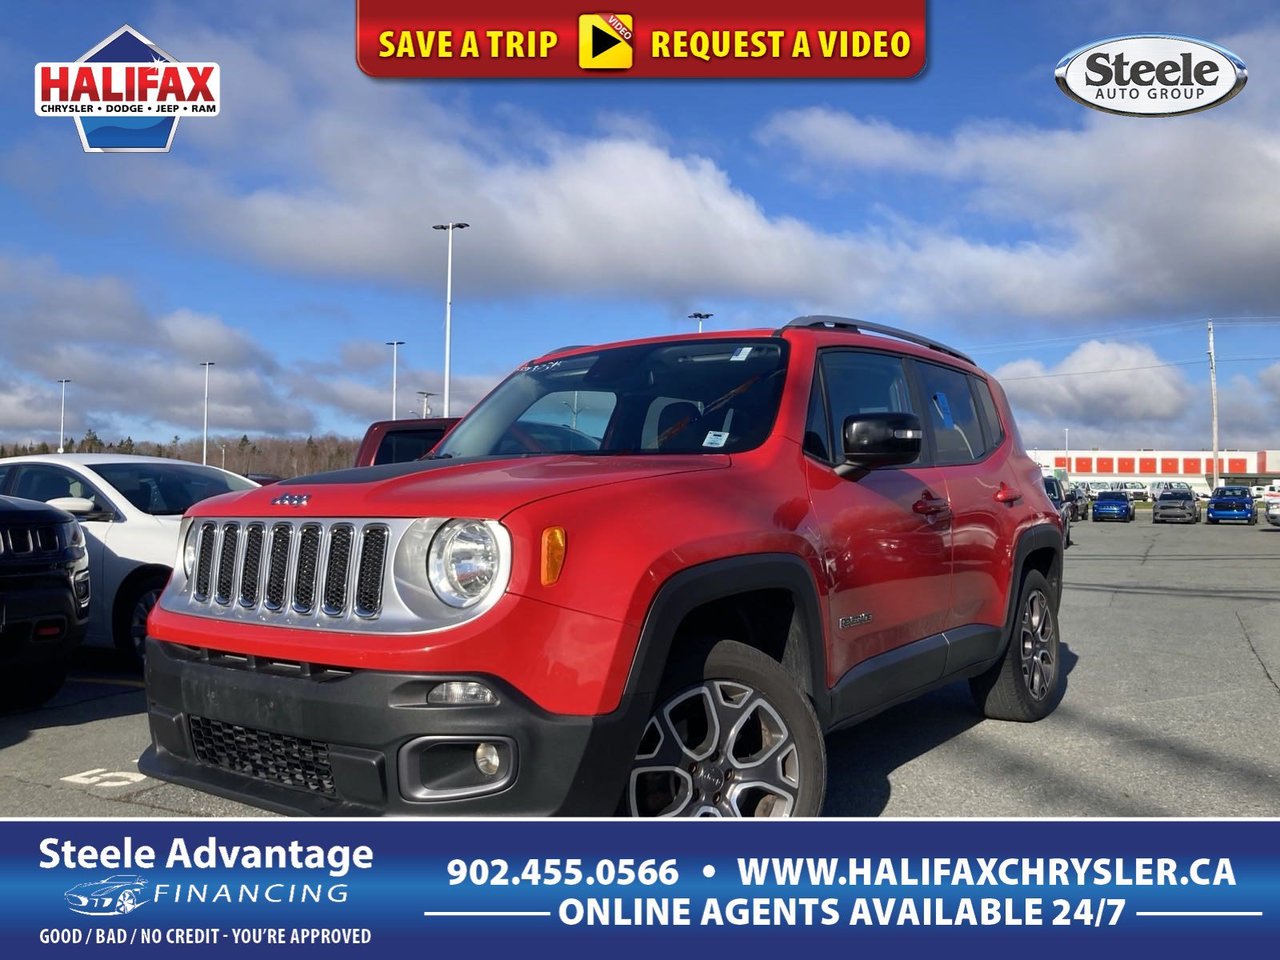 2015 Jeep Renegade Limited - LOW KM, 4WD, HEATED LEATHER SEATS AND WHEEL, BACK UP CAMERA, POWER EQUIPMENT, NO ACCIDENTS-0